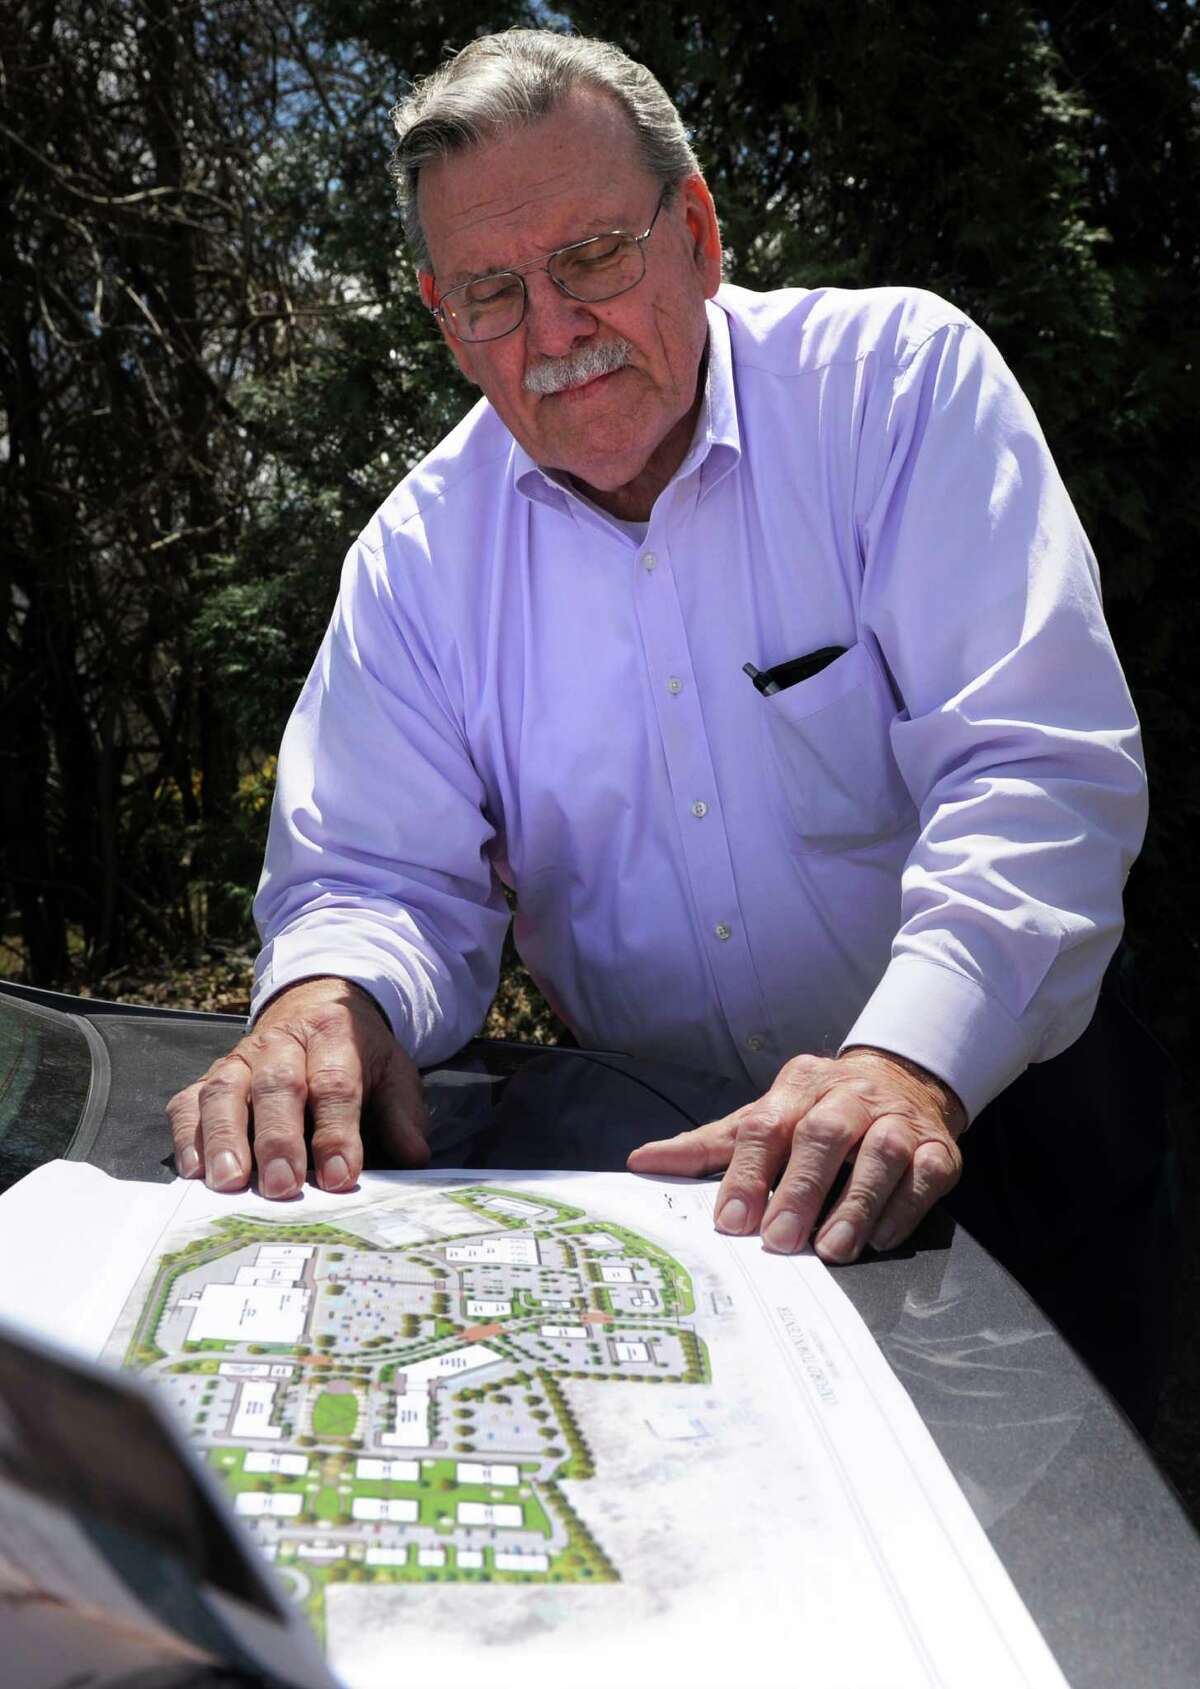 Herman Schuler, sales and development consultant for Haynes, goes over the plans for Oxford's future mixed use development that will include 150 homes and a Market 32, formerly Price Chopper supermarket, Tuesday, April 28, 2015, at the site off of Route 67 in Oxford, Conn.